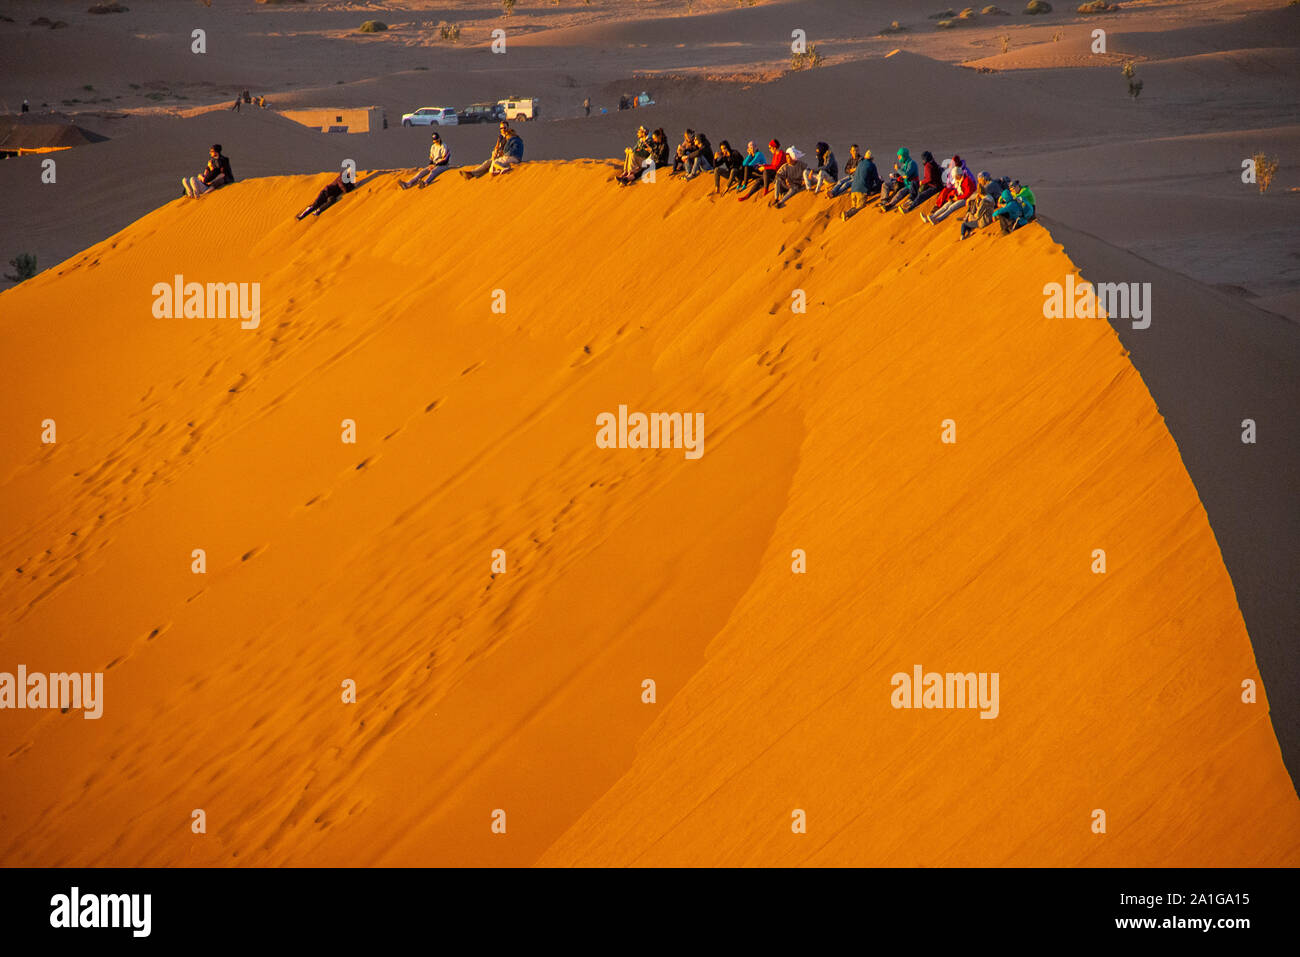 people on sand dunes in sunset at desert of Morocco Stock Photo